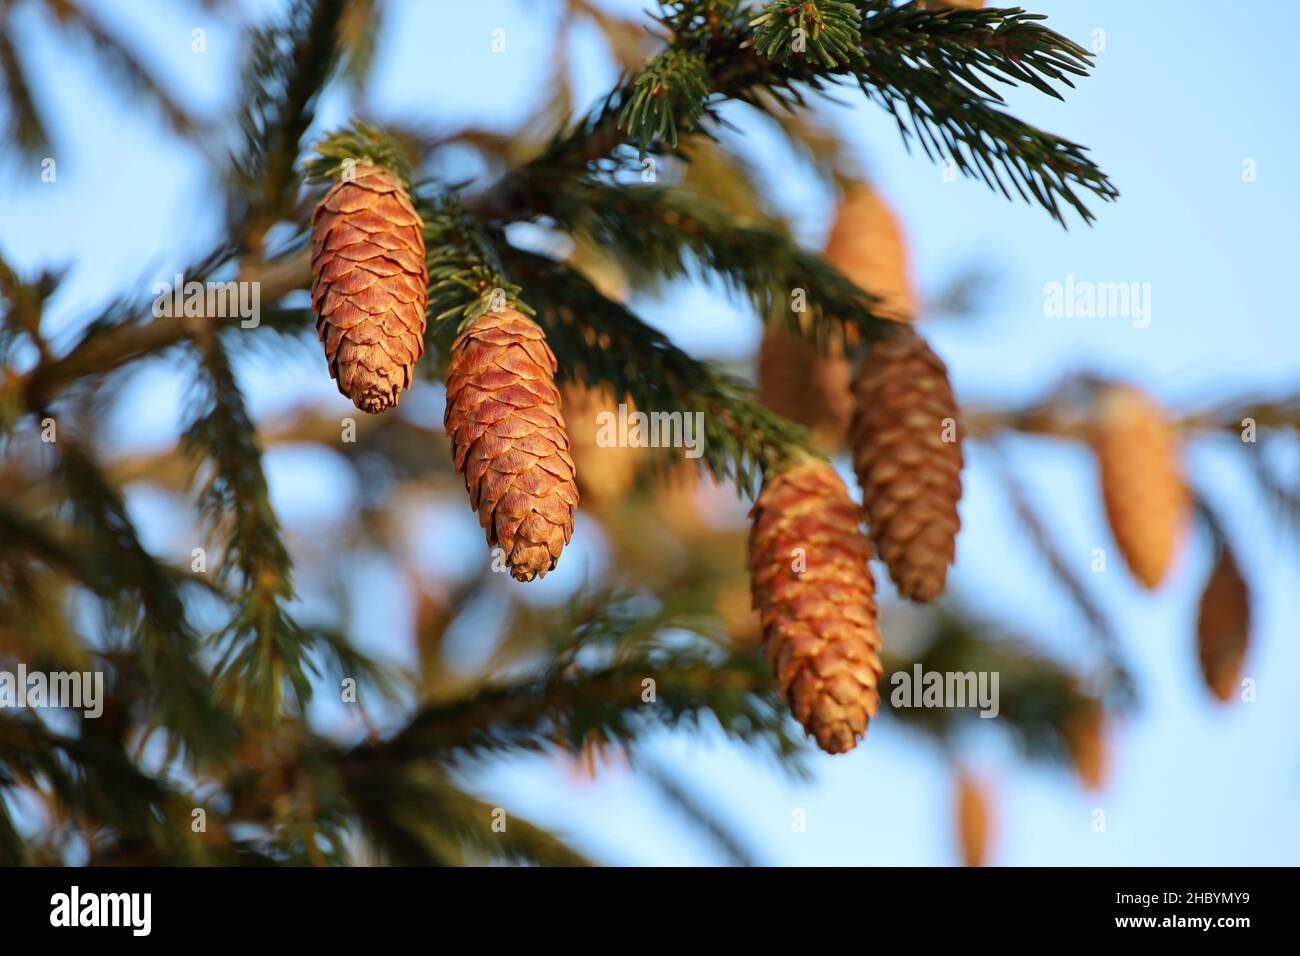 Spruce cones on a fir tree branches against the blue sky Stock Photo